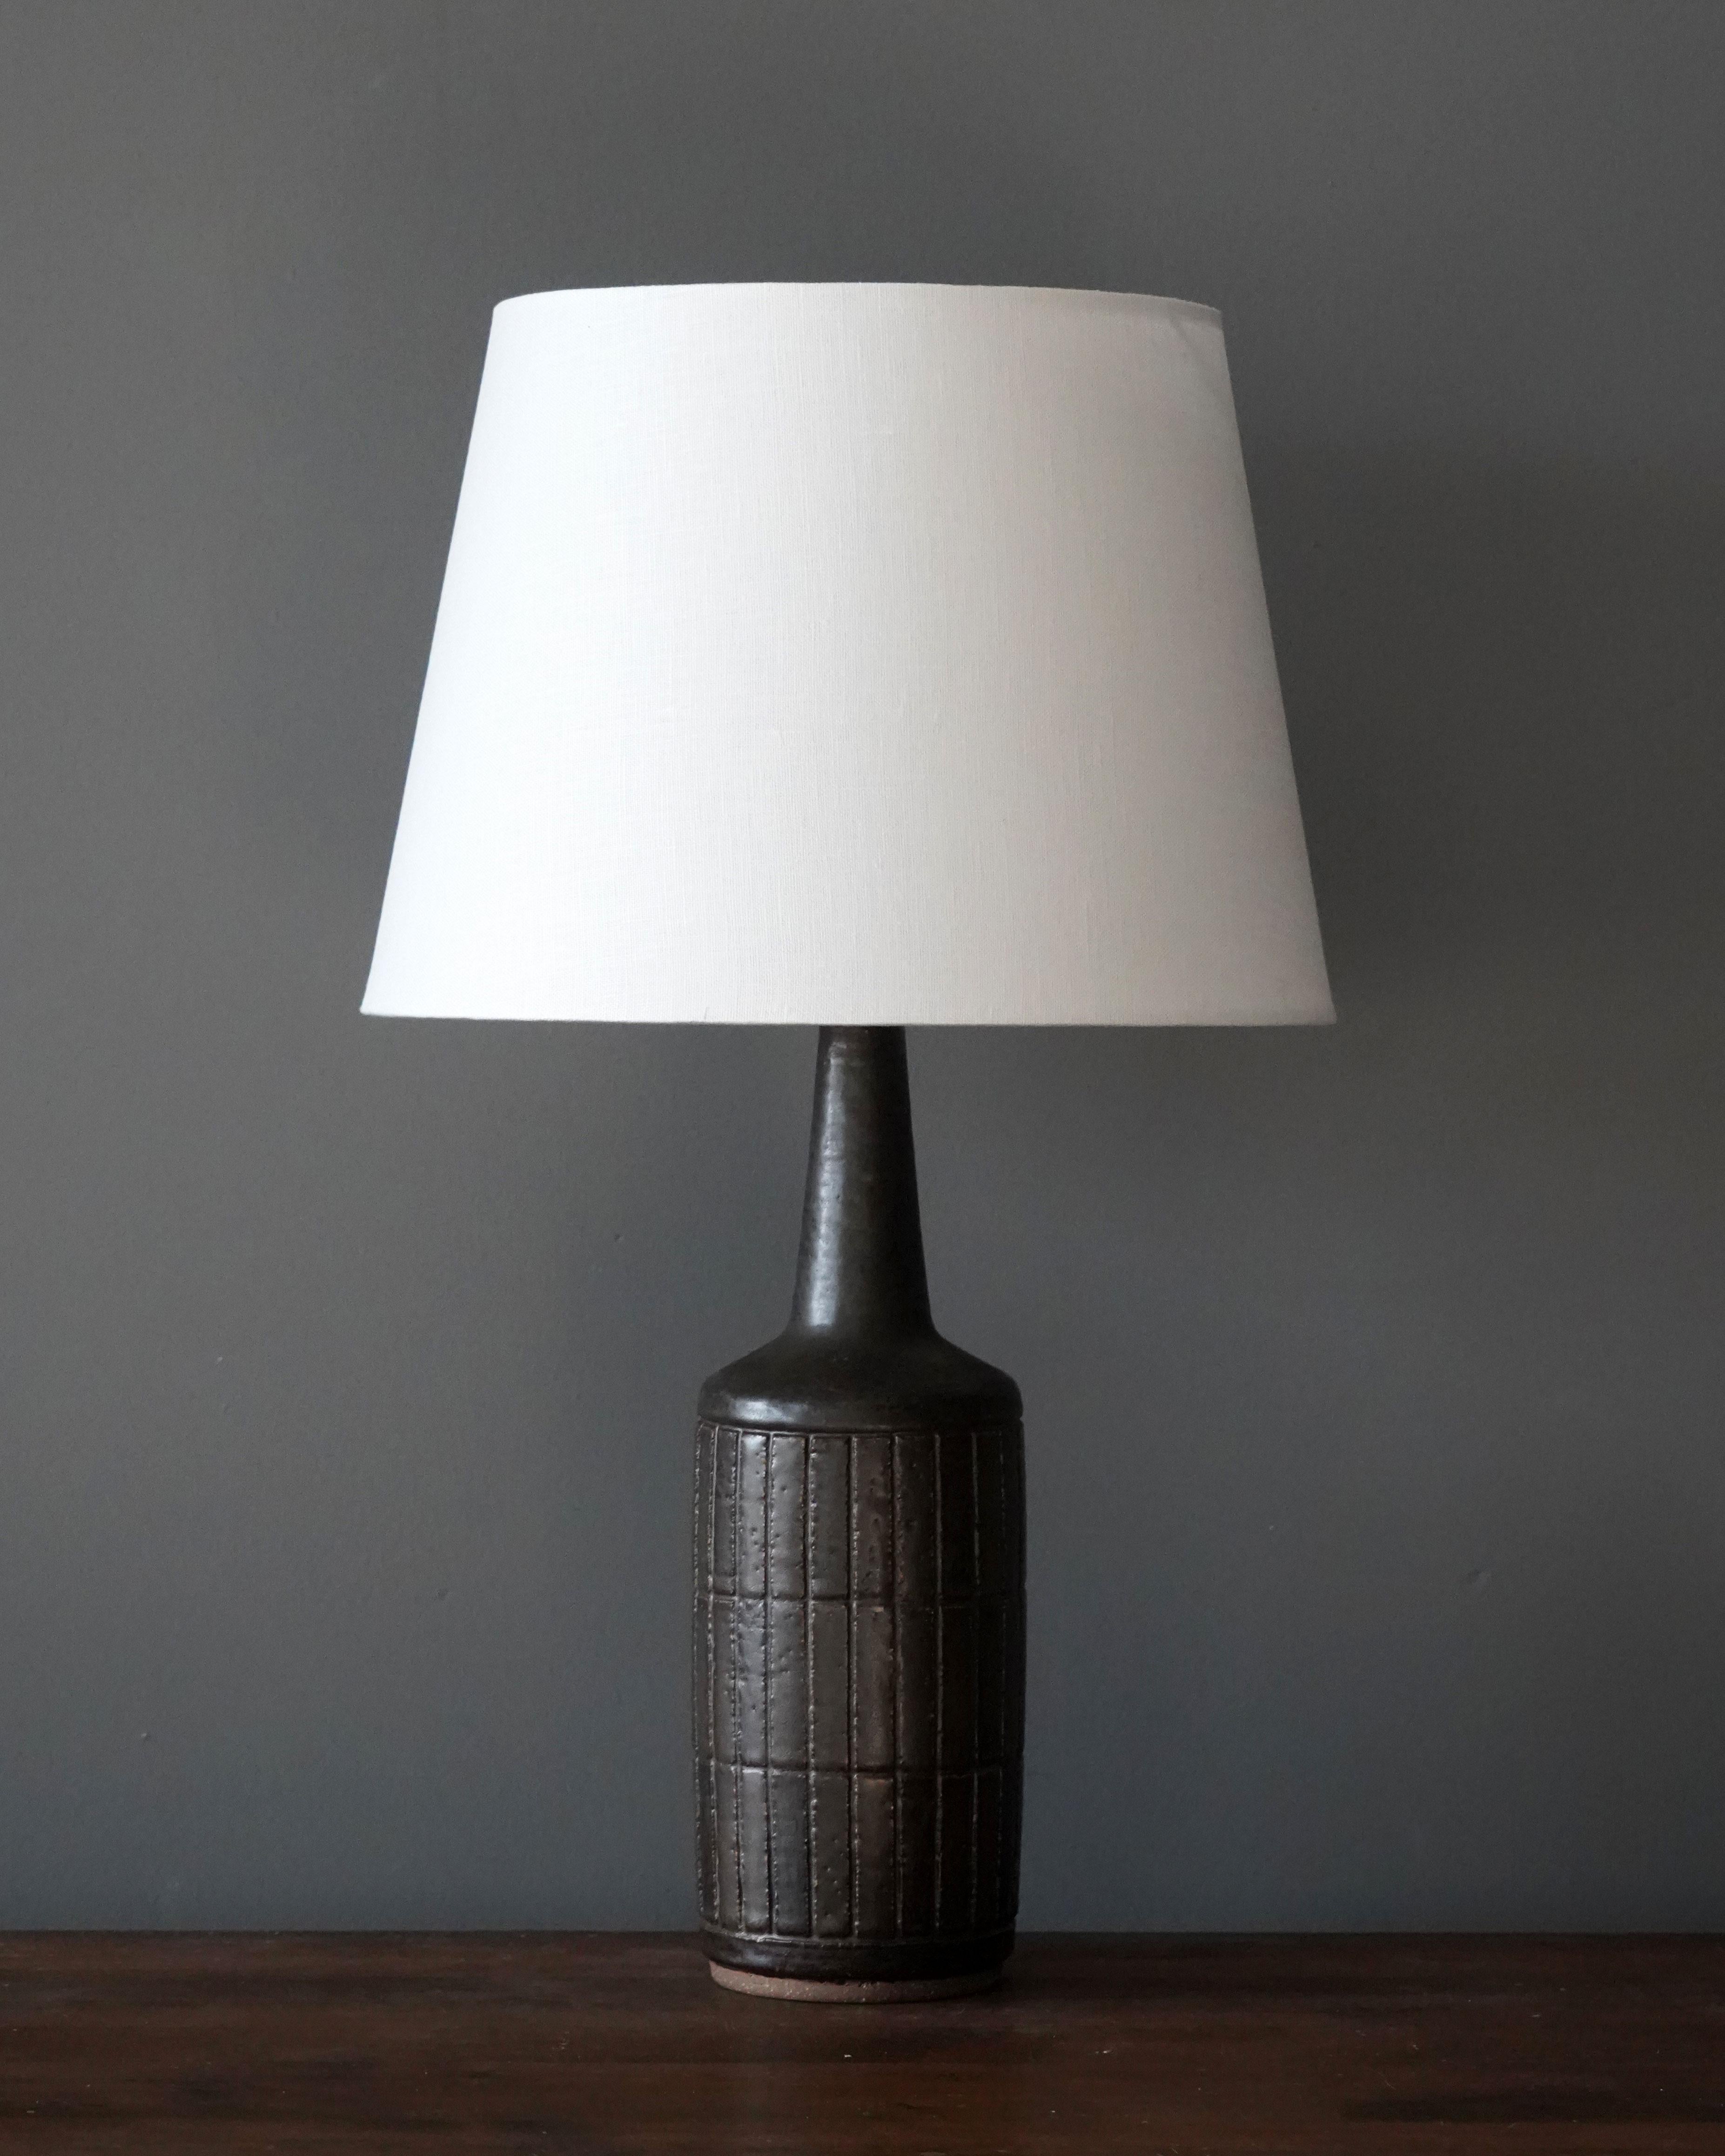 A table / desk lamp designed by husband and wife Per & Annelise Linneman-Schmidt. Handcast in firesand. Produced in their own Studio, named Palshus, in Sengeløse, Denmark. Signed.

The lampshade is attached for reference and not included in the